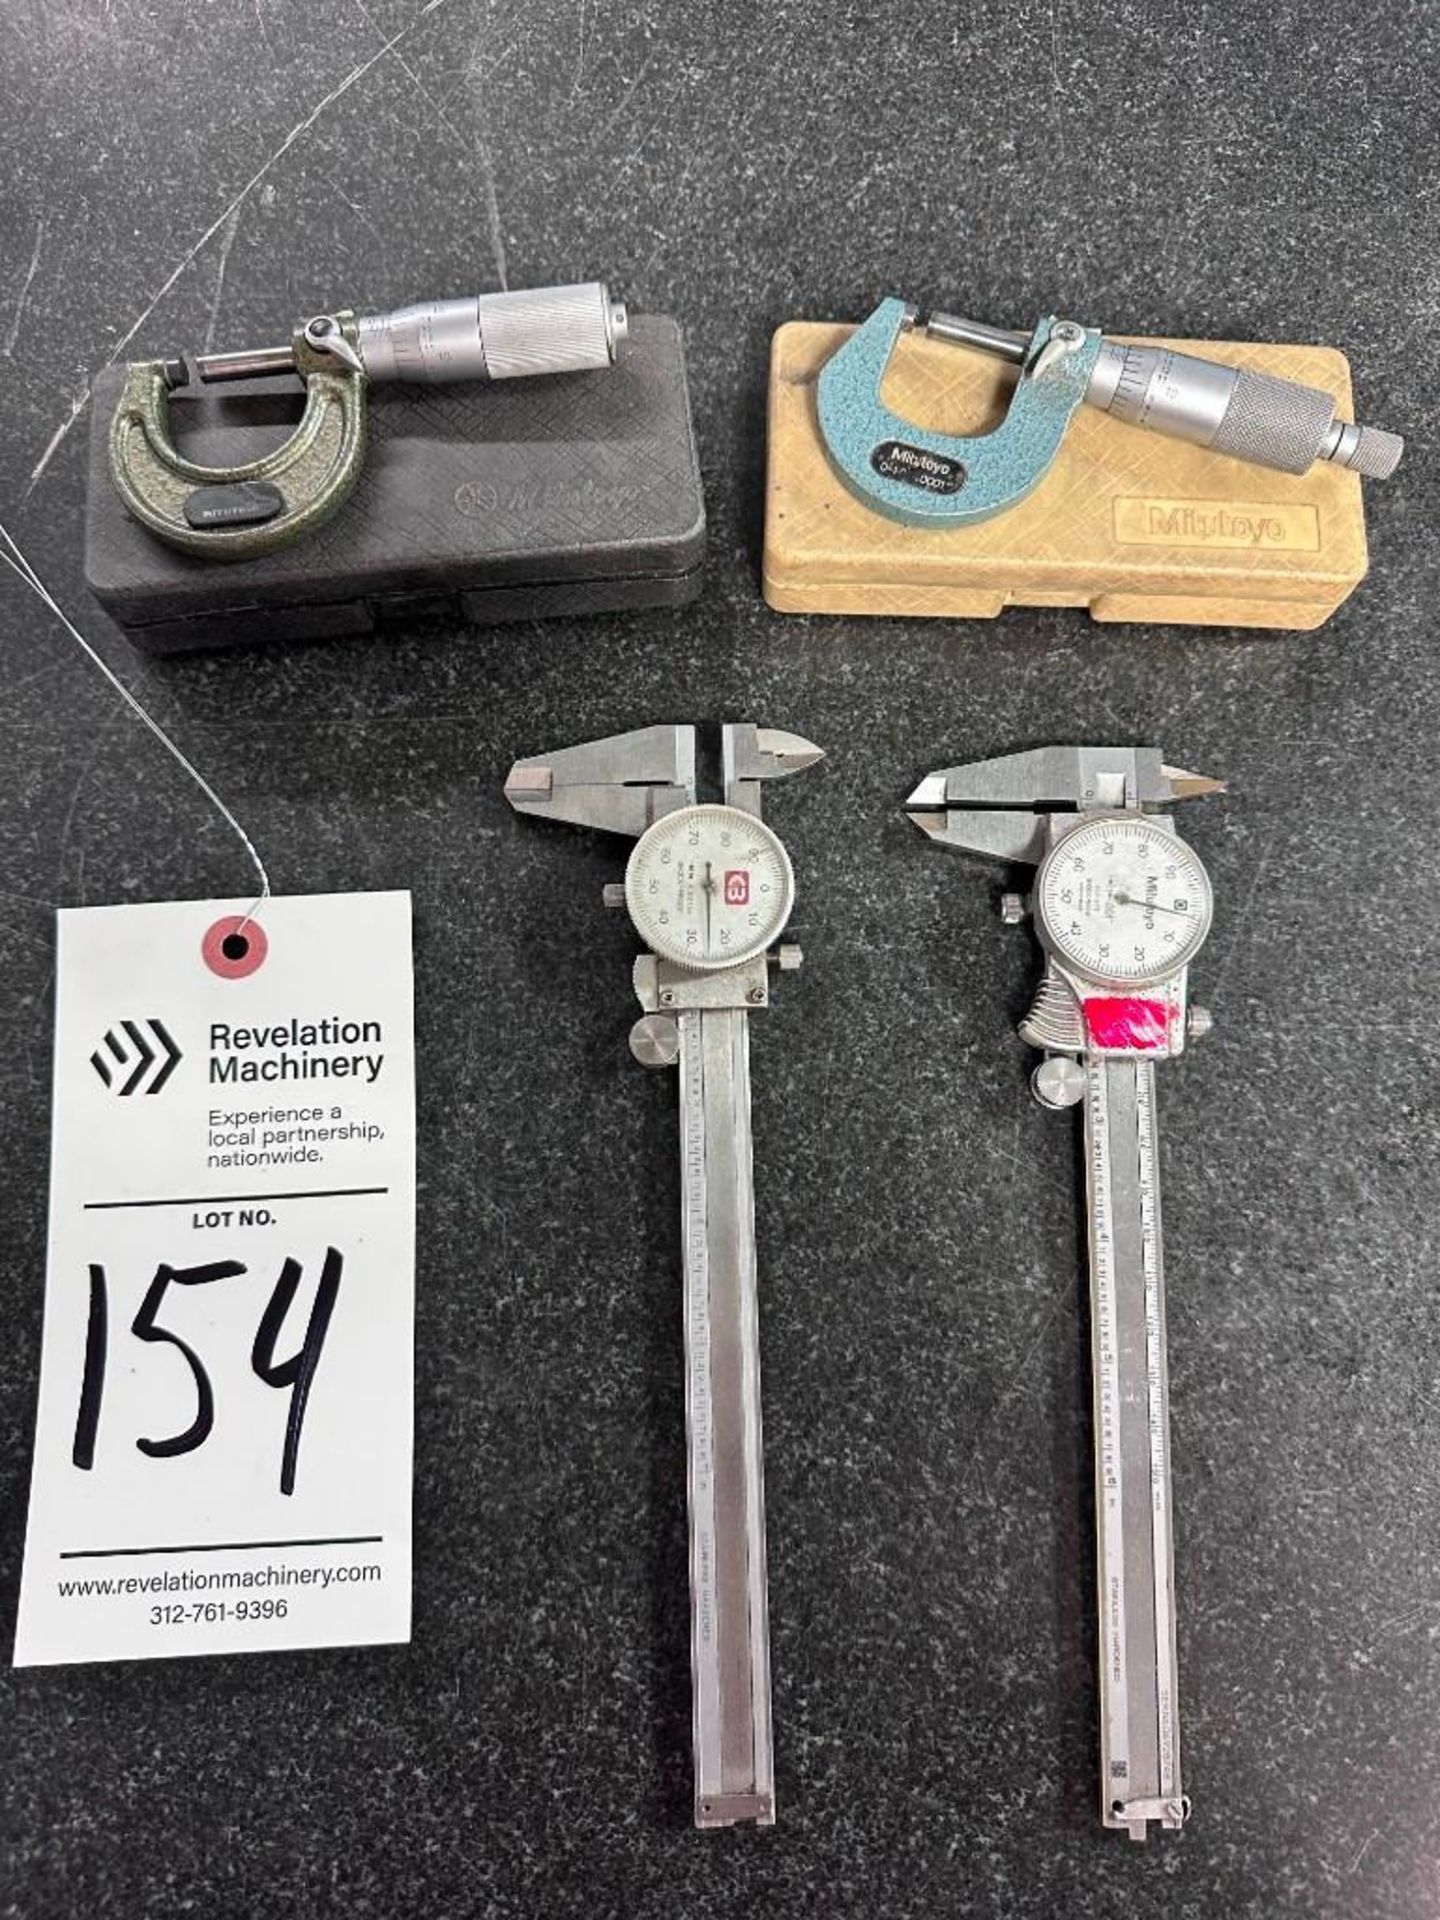 INSPECTION - CHICAGO BRAND, MITUTOYO CALIPERS AND MICROMETERS